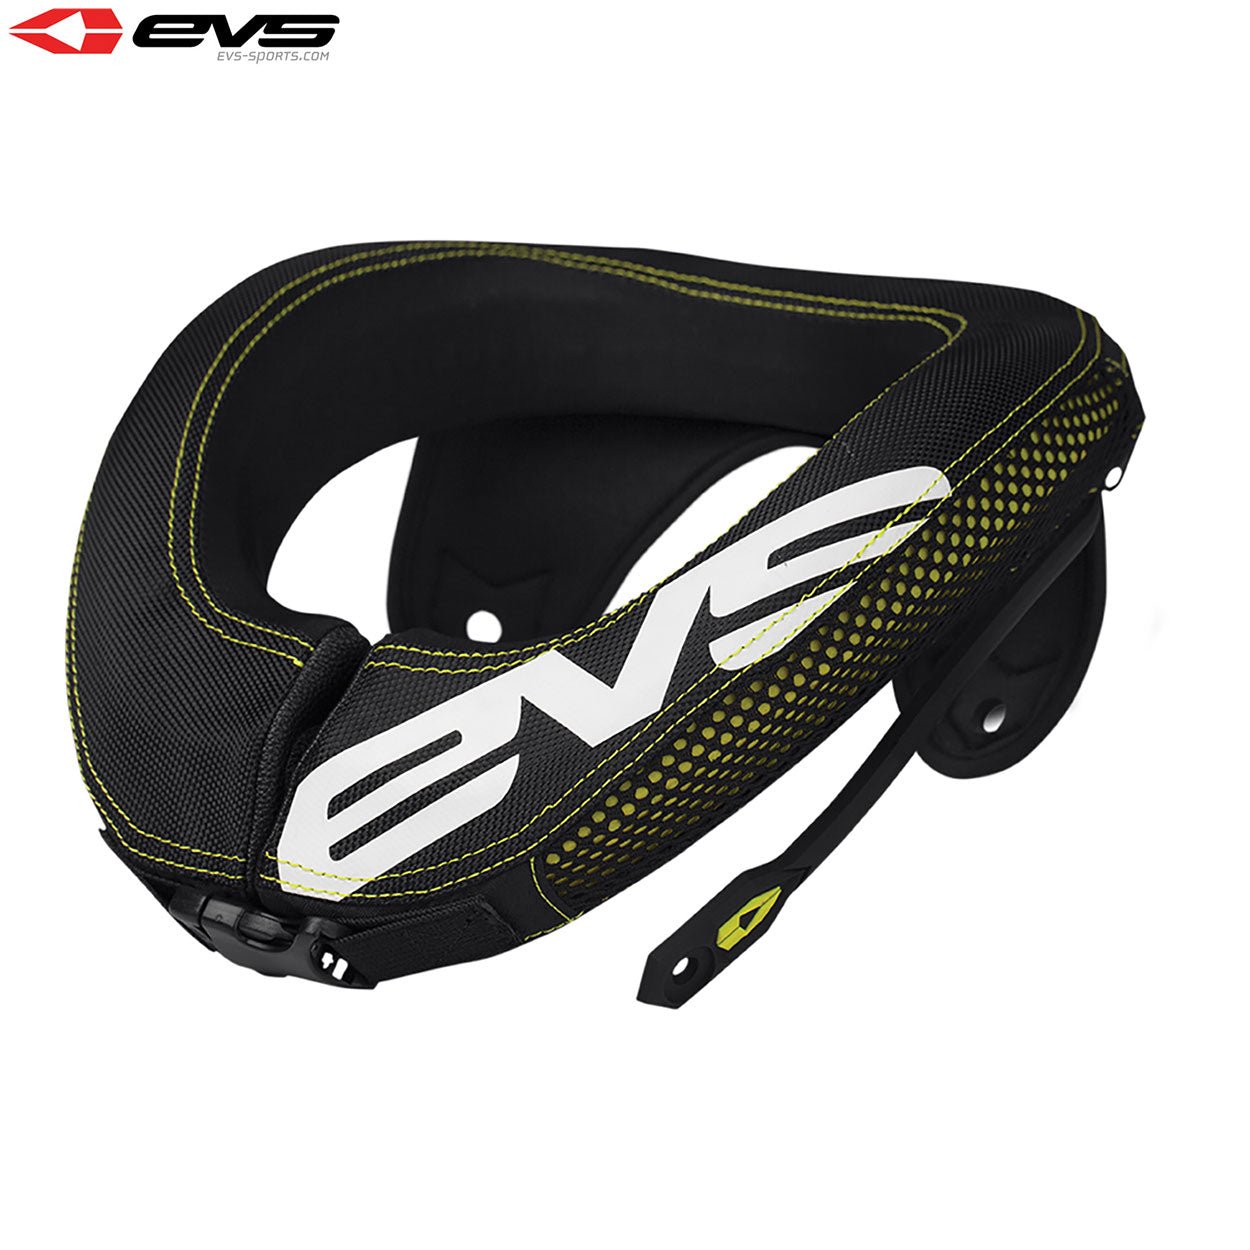 EVS R3 Neck Protector Including Armour Straps Youth (Black/Hi-Viz Yellow) Size Youth - OS / Black - EVS